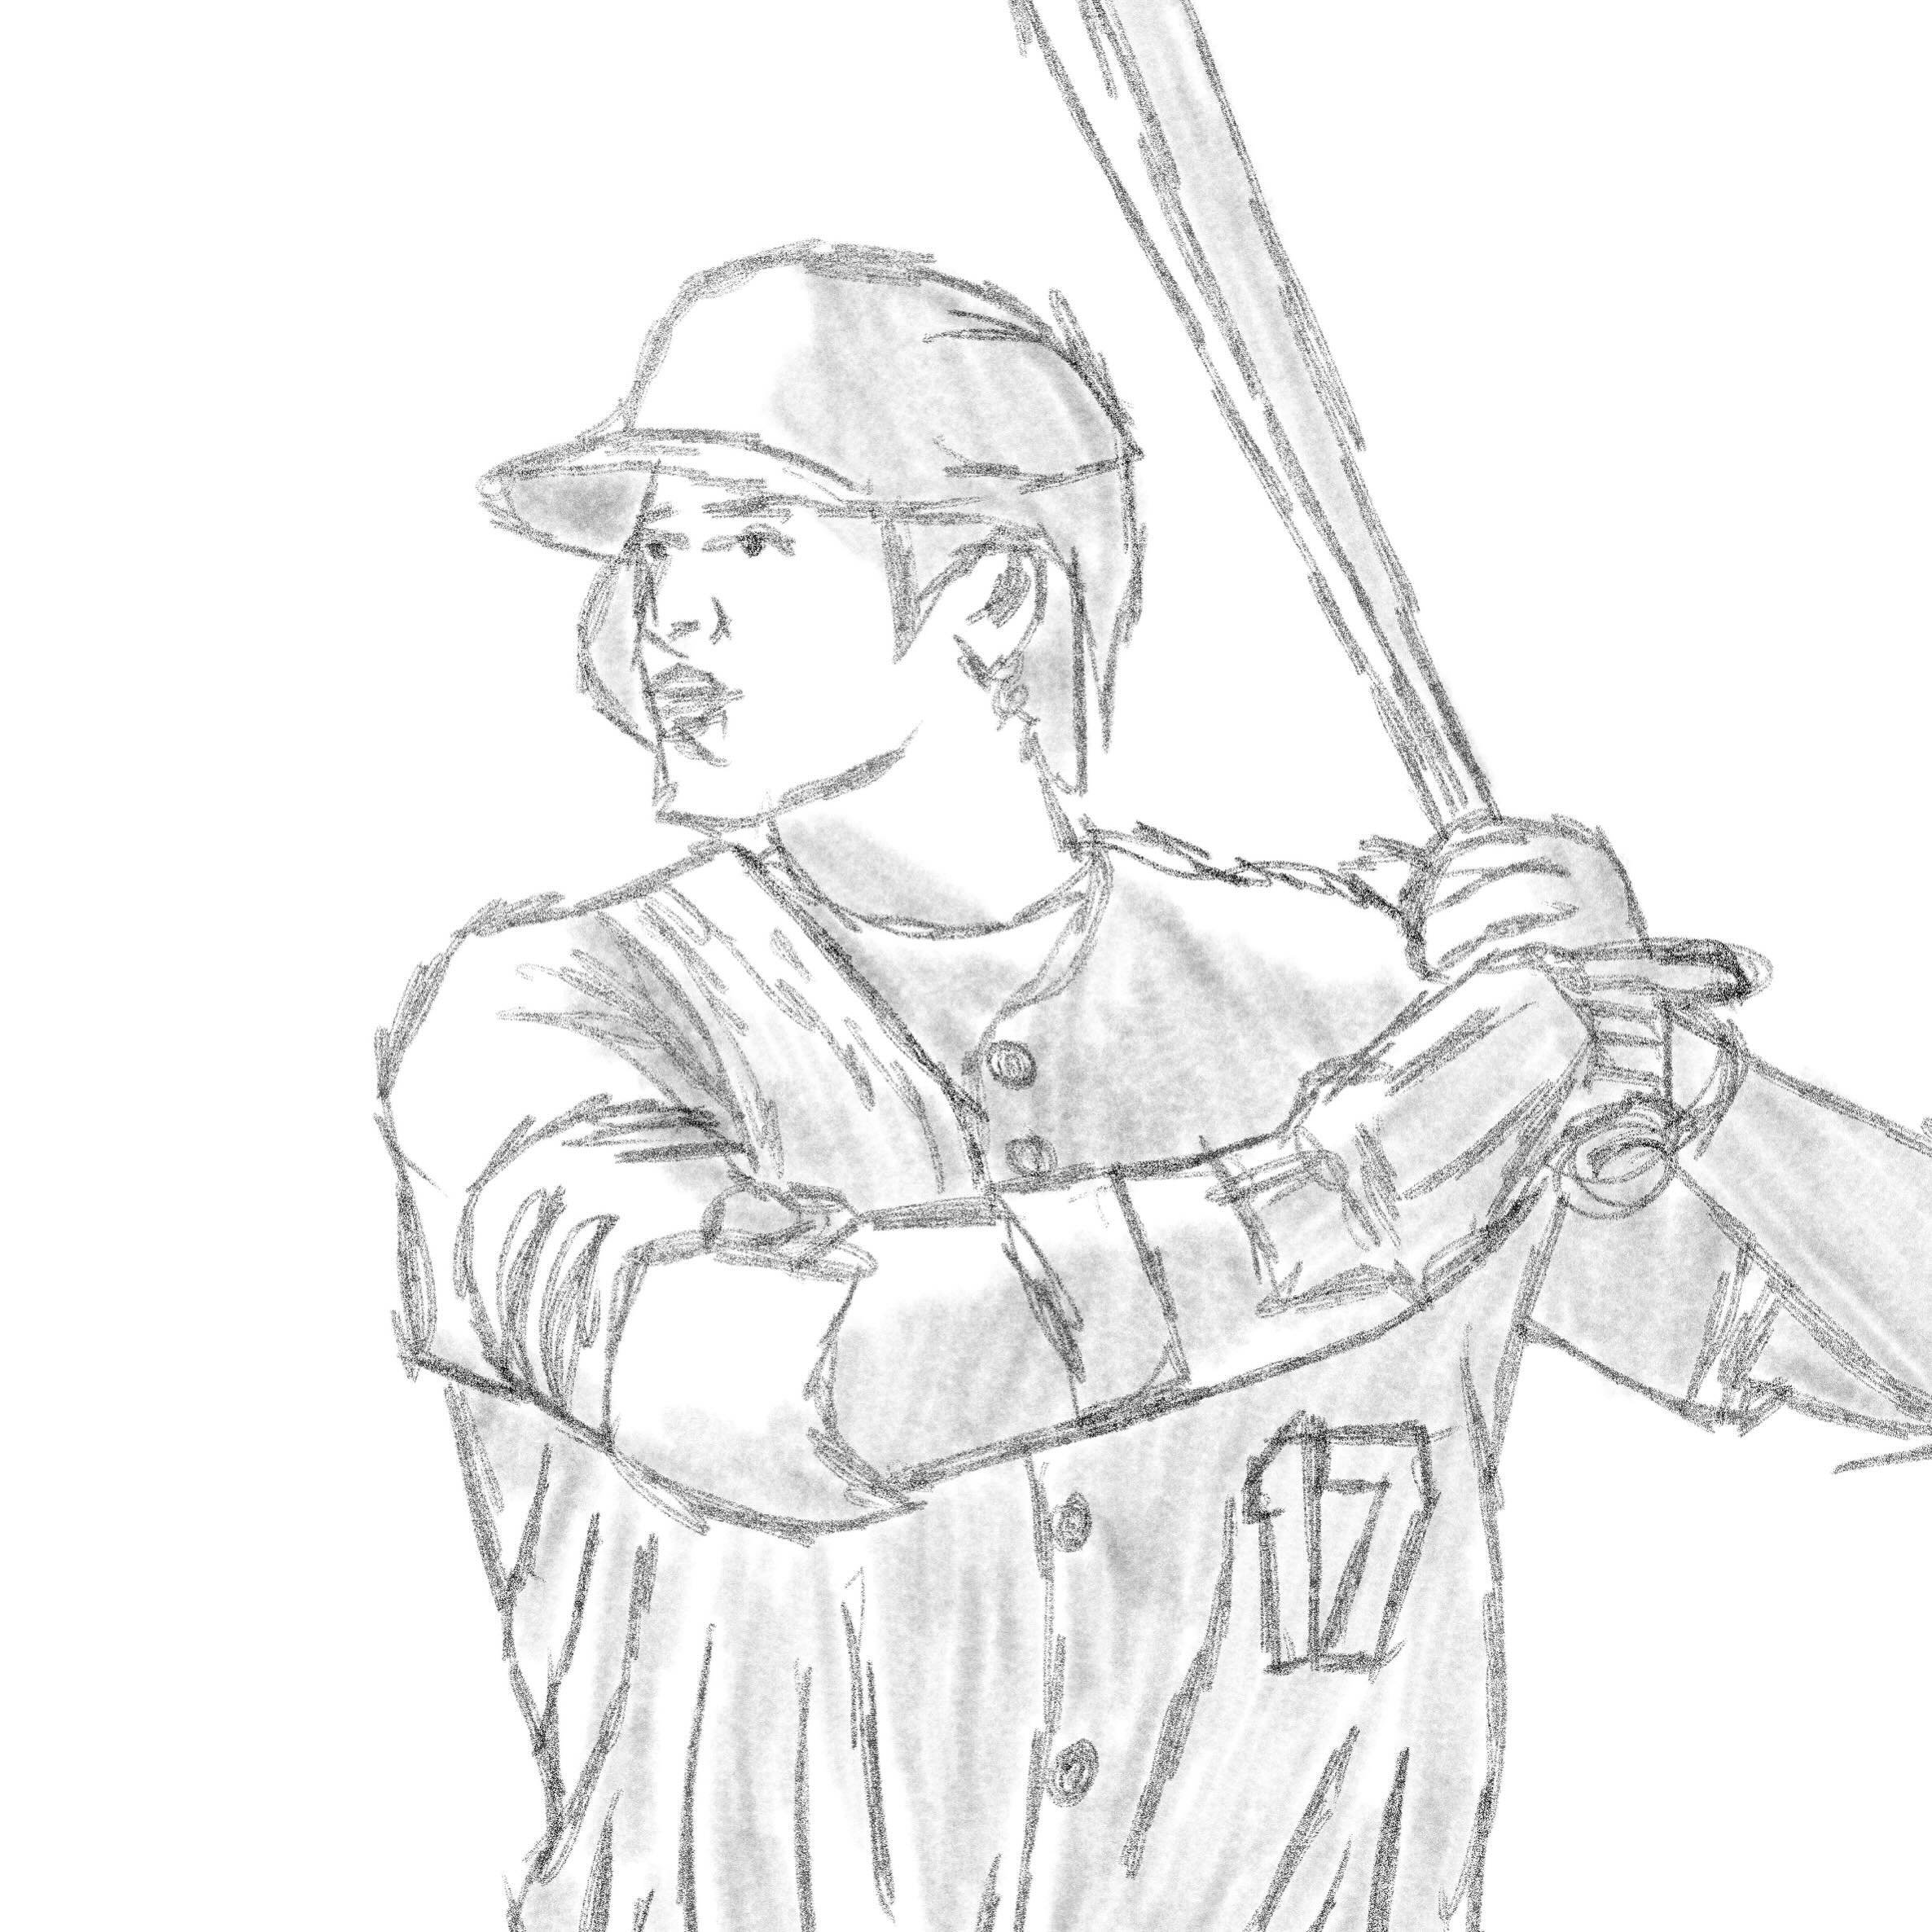 To say LA is excited for Shohei Ohtani is a major understatement. We&rsquo;re ready for Shotime to officially begin.

Also? My Pack of Pencils+ for Procreate and Photoshop is coming in hot in 2024. Join the List for the latest updates.